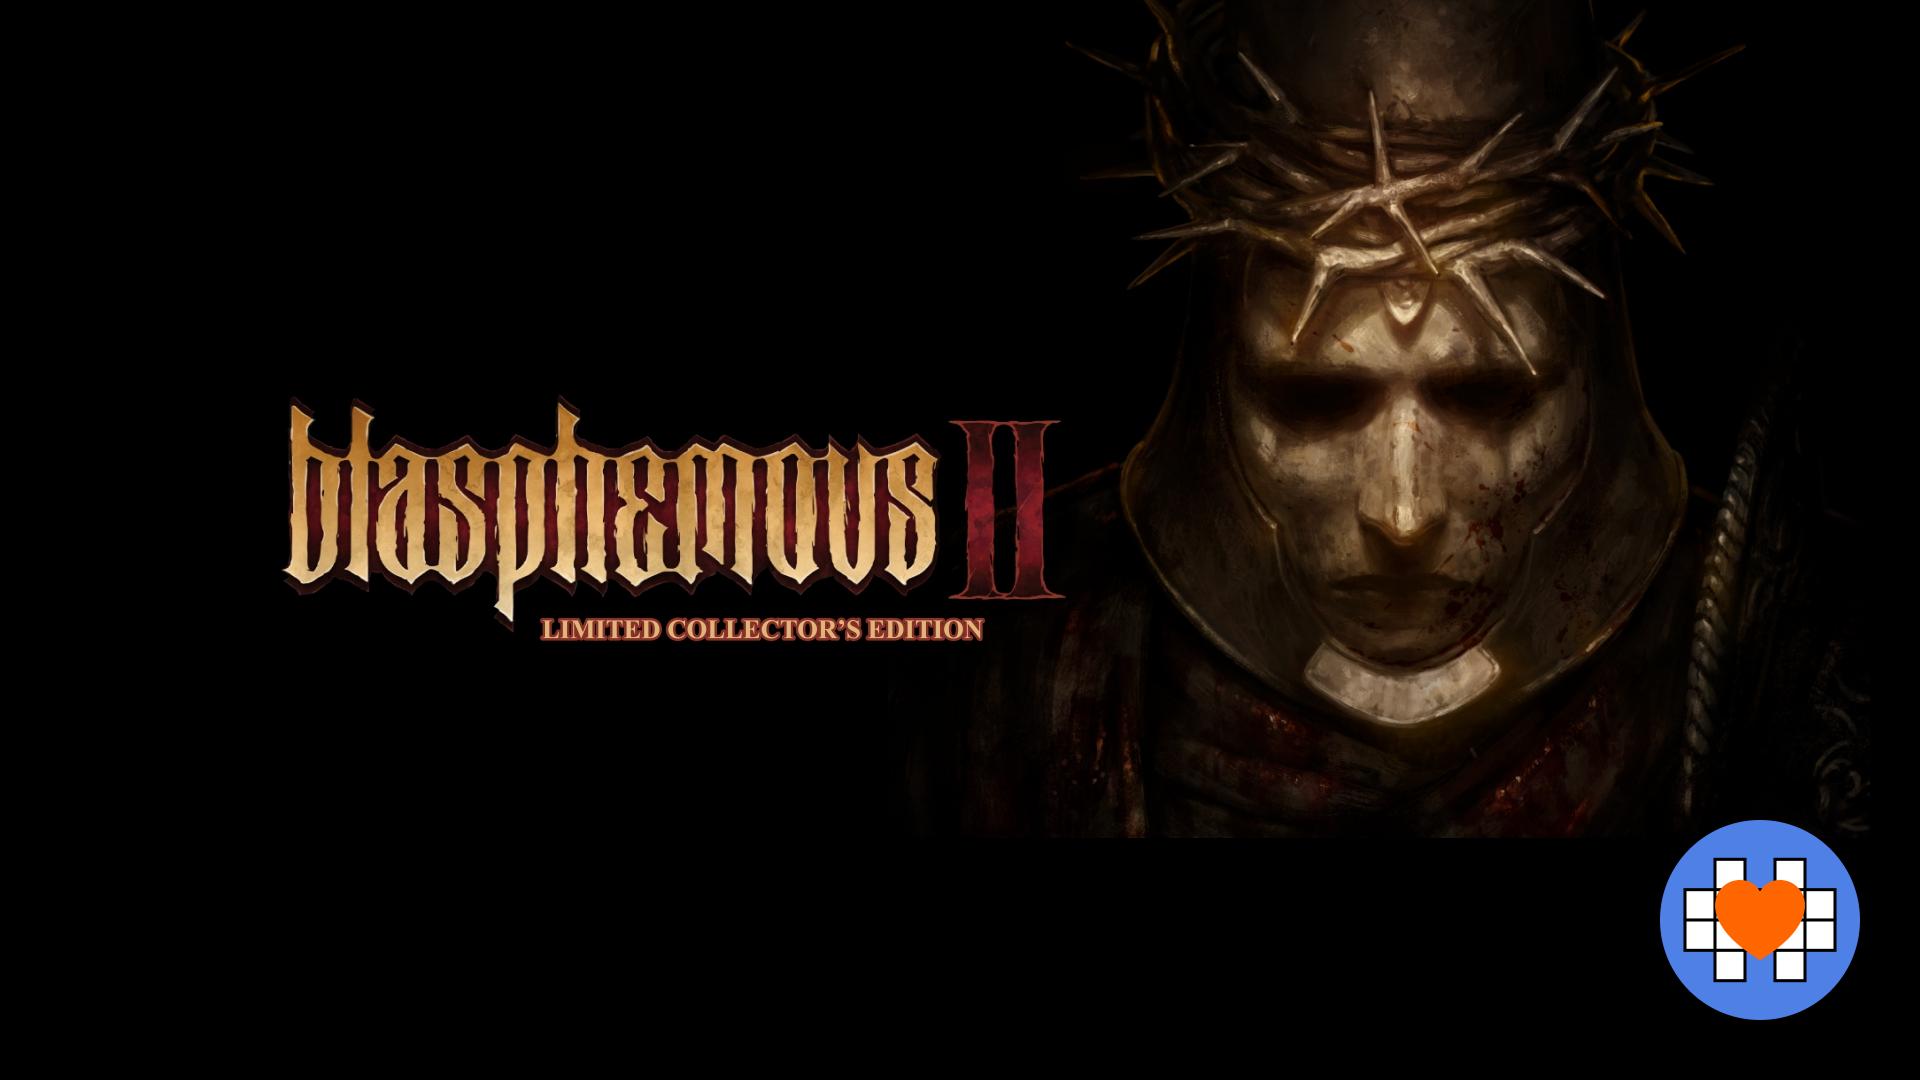  Blasphemous II Limited Collector's Edition for